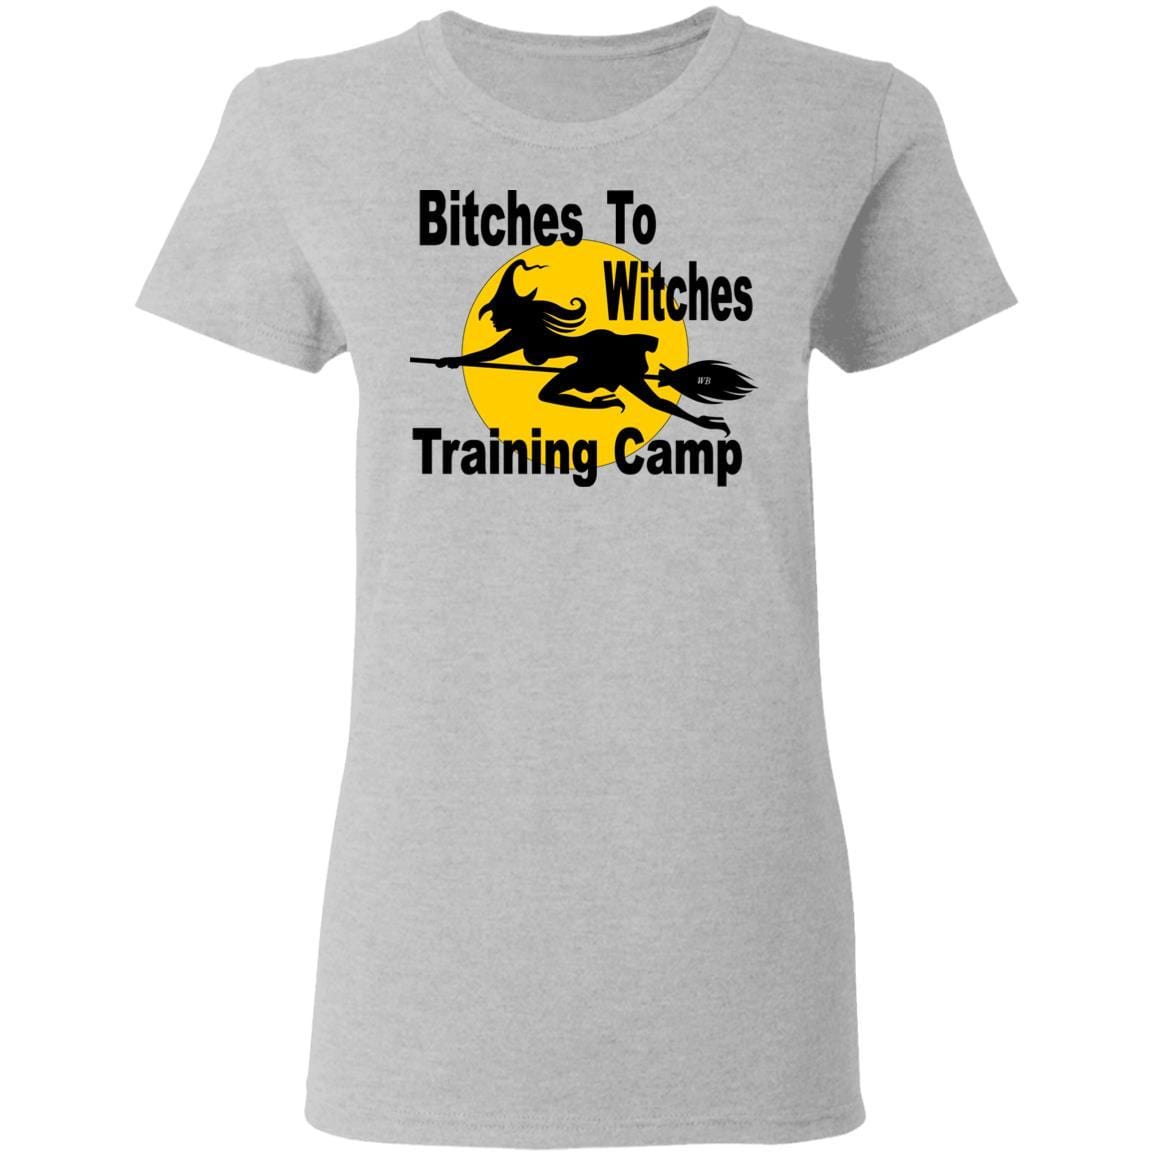 T-Shirts Sport Grey / S WineyBitches.Co "Bitches To Witches Training Camp" Halloween Ladies' 5.3 oz. T-Shirt WineyBitchesCo